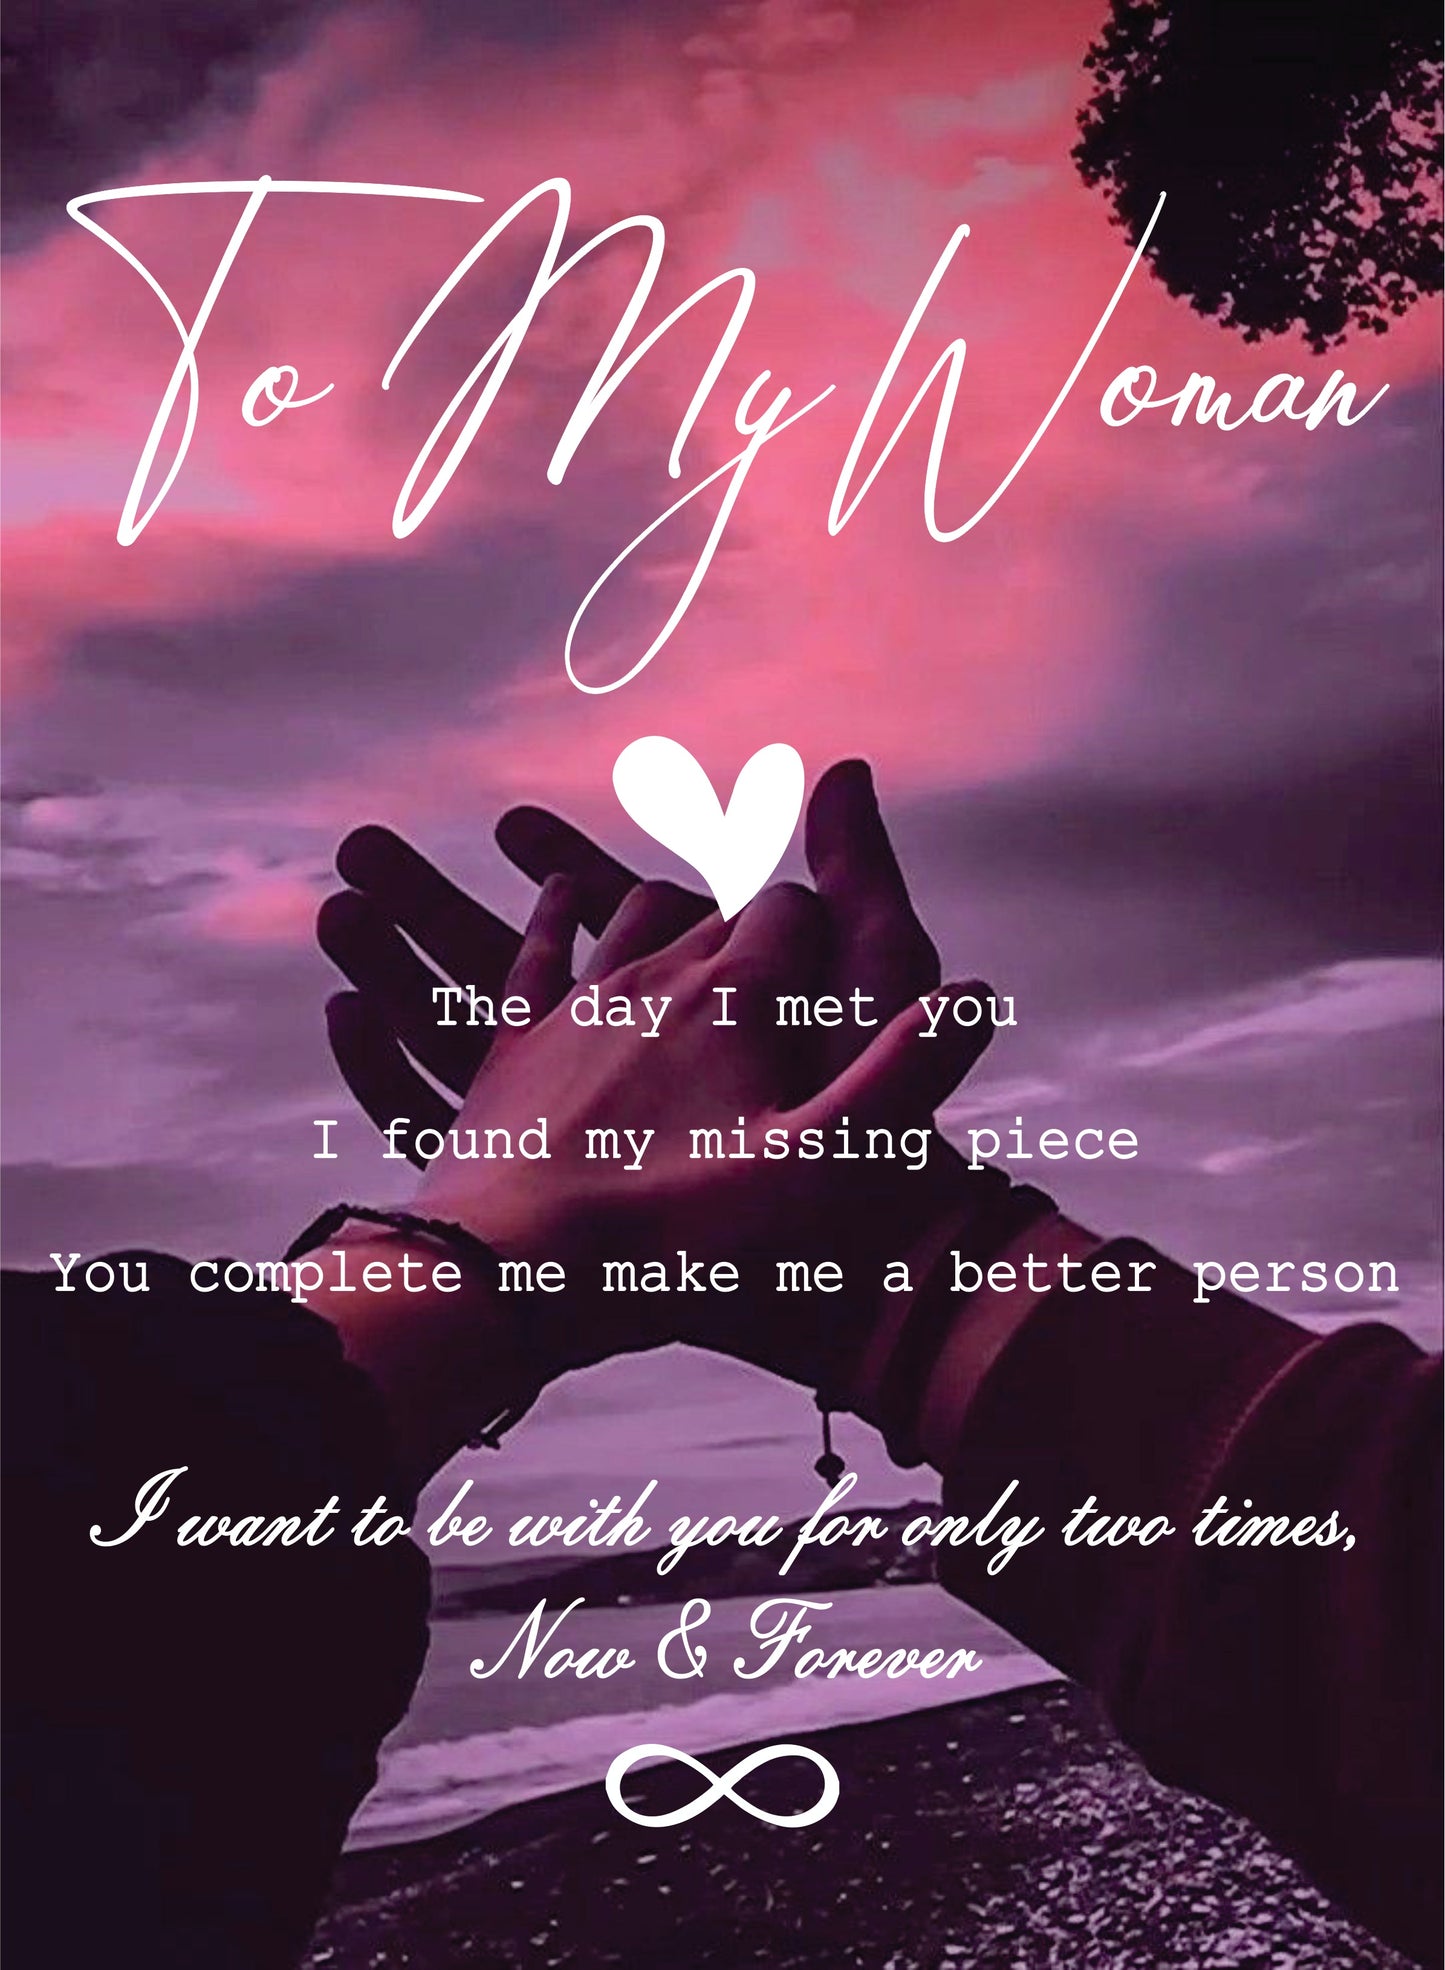 FOR LOVE - TO MY MAN/WOMAN, I WANT ALL OF MY LAST TO BE WITH YOU KEYCHAIN